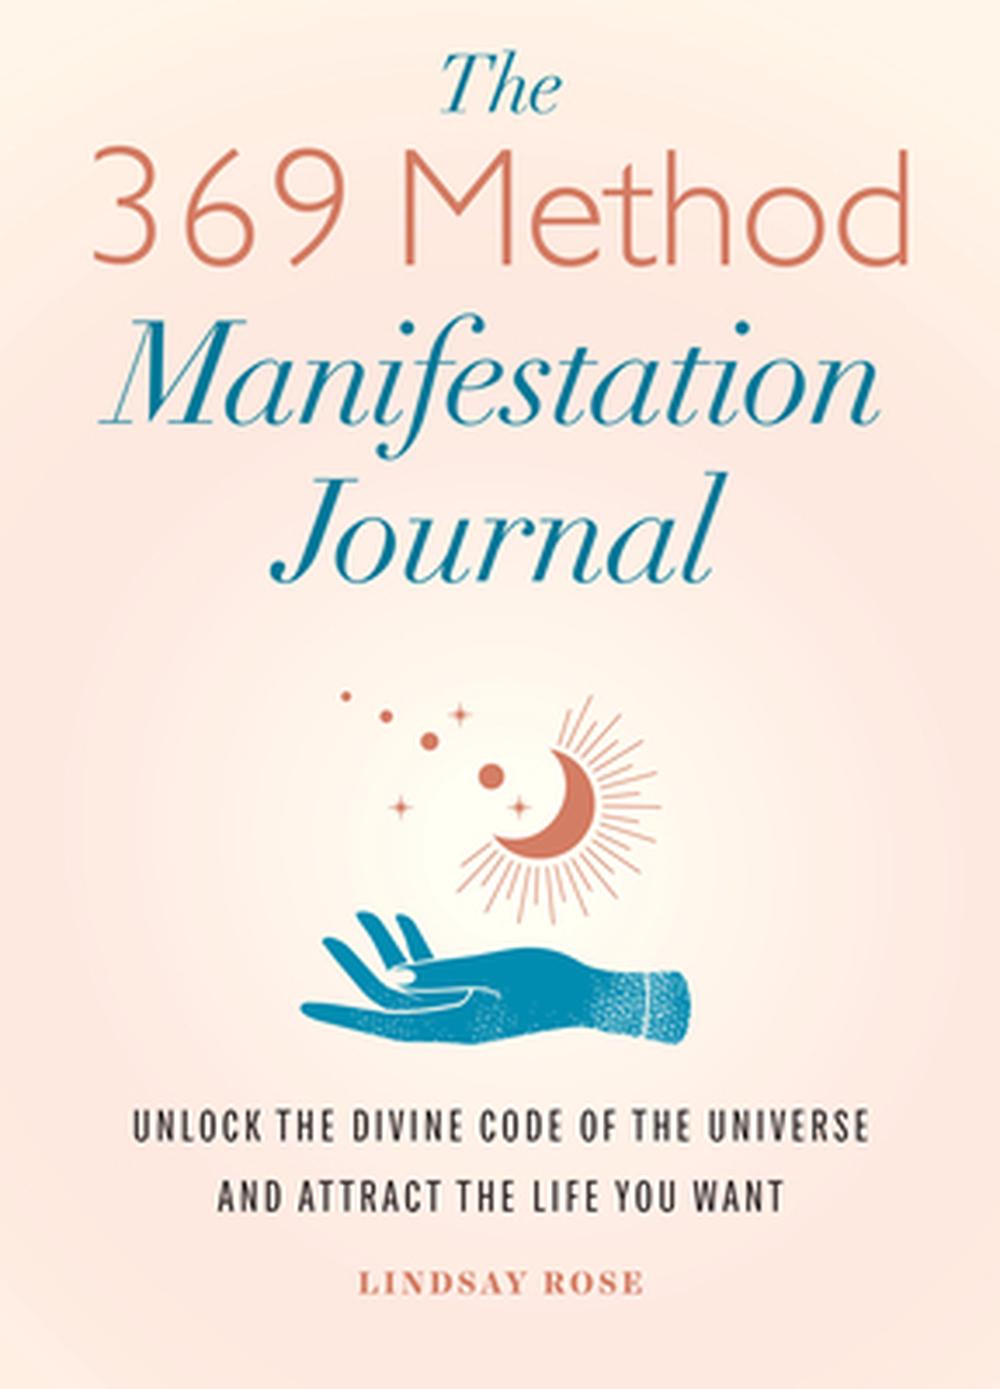 Law of Attraction Manifestation Journal: A Guided Journal for Manifesting  Your Deepest Desires